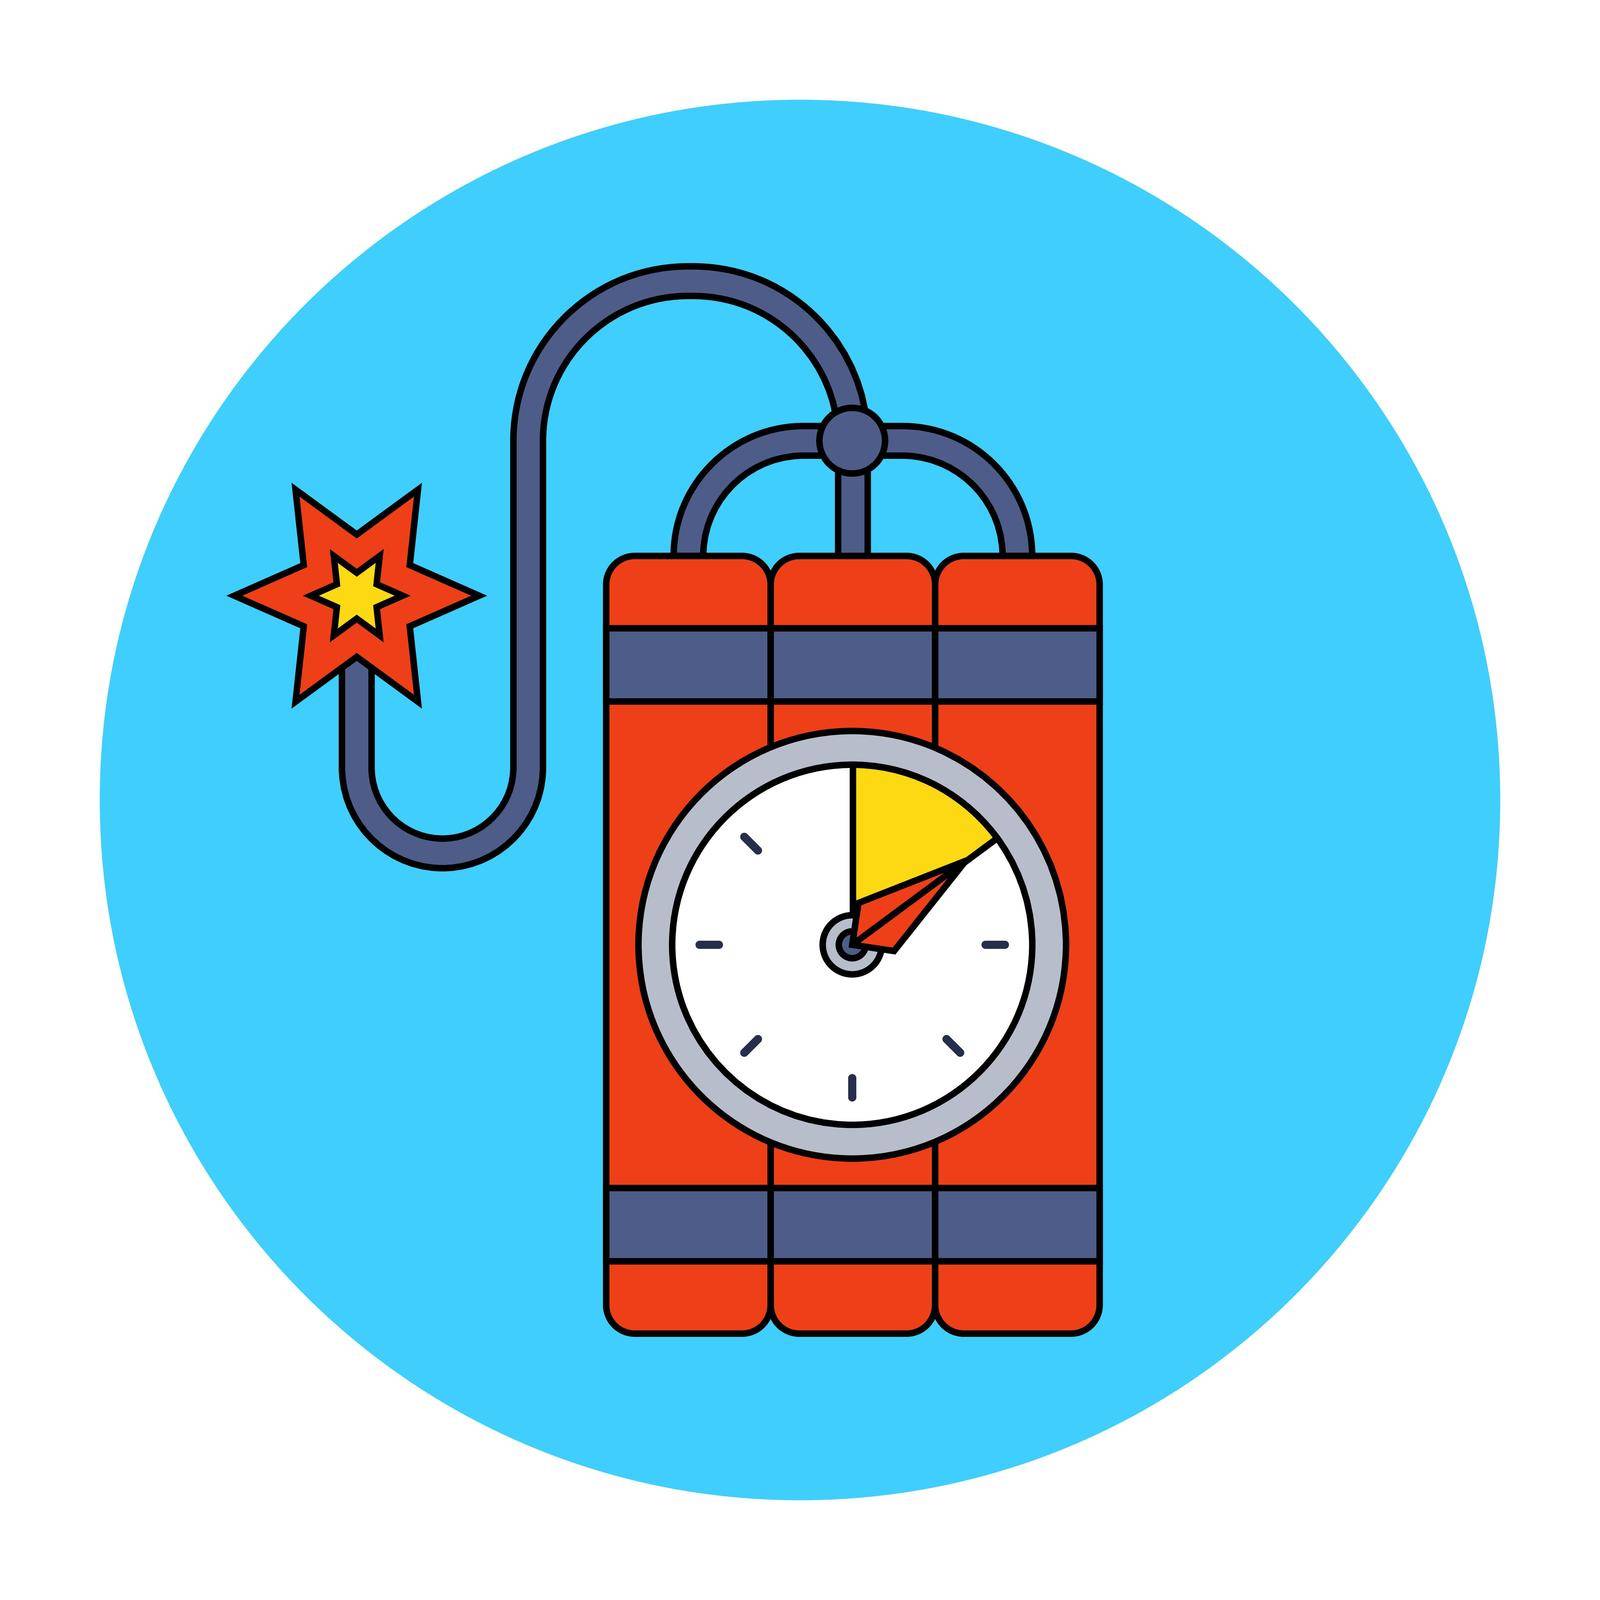 red dynamite with a stopwatch and a burning wick. the bomb will go off soon. flat vector illustration